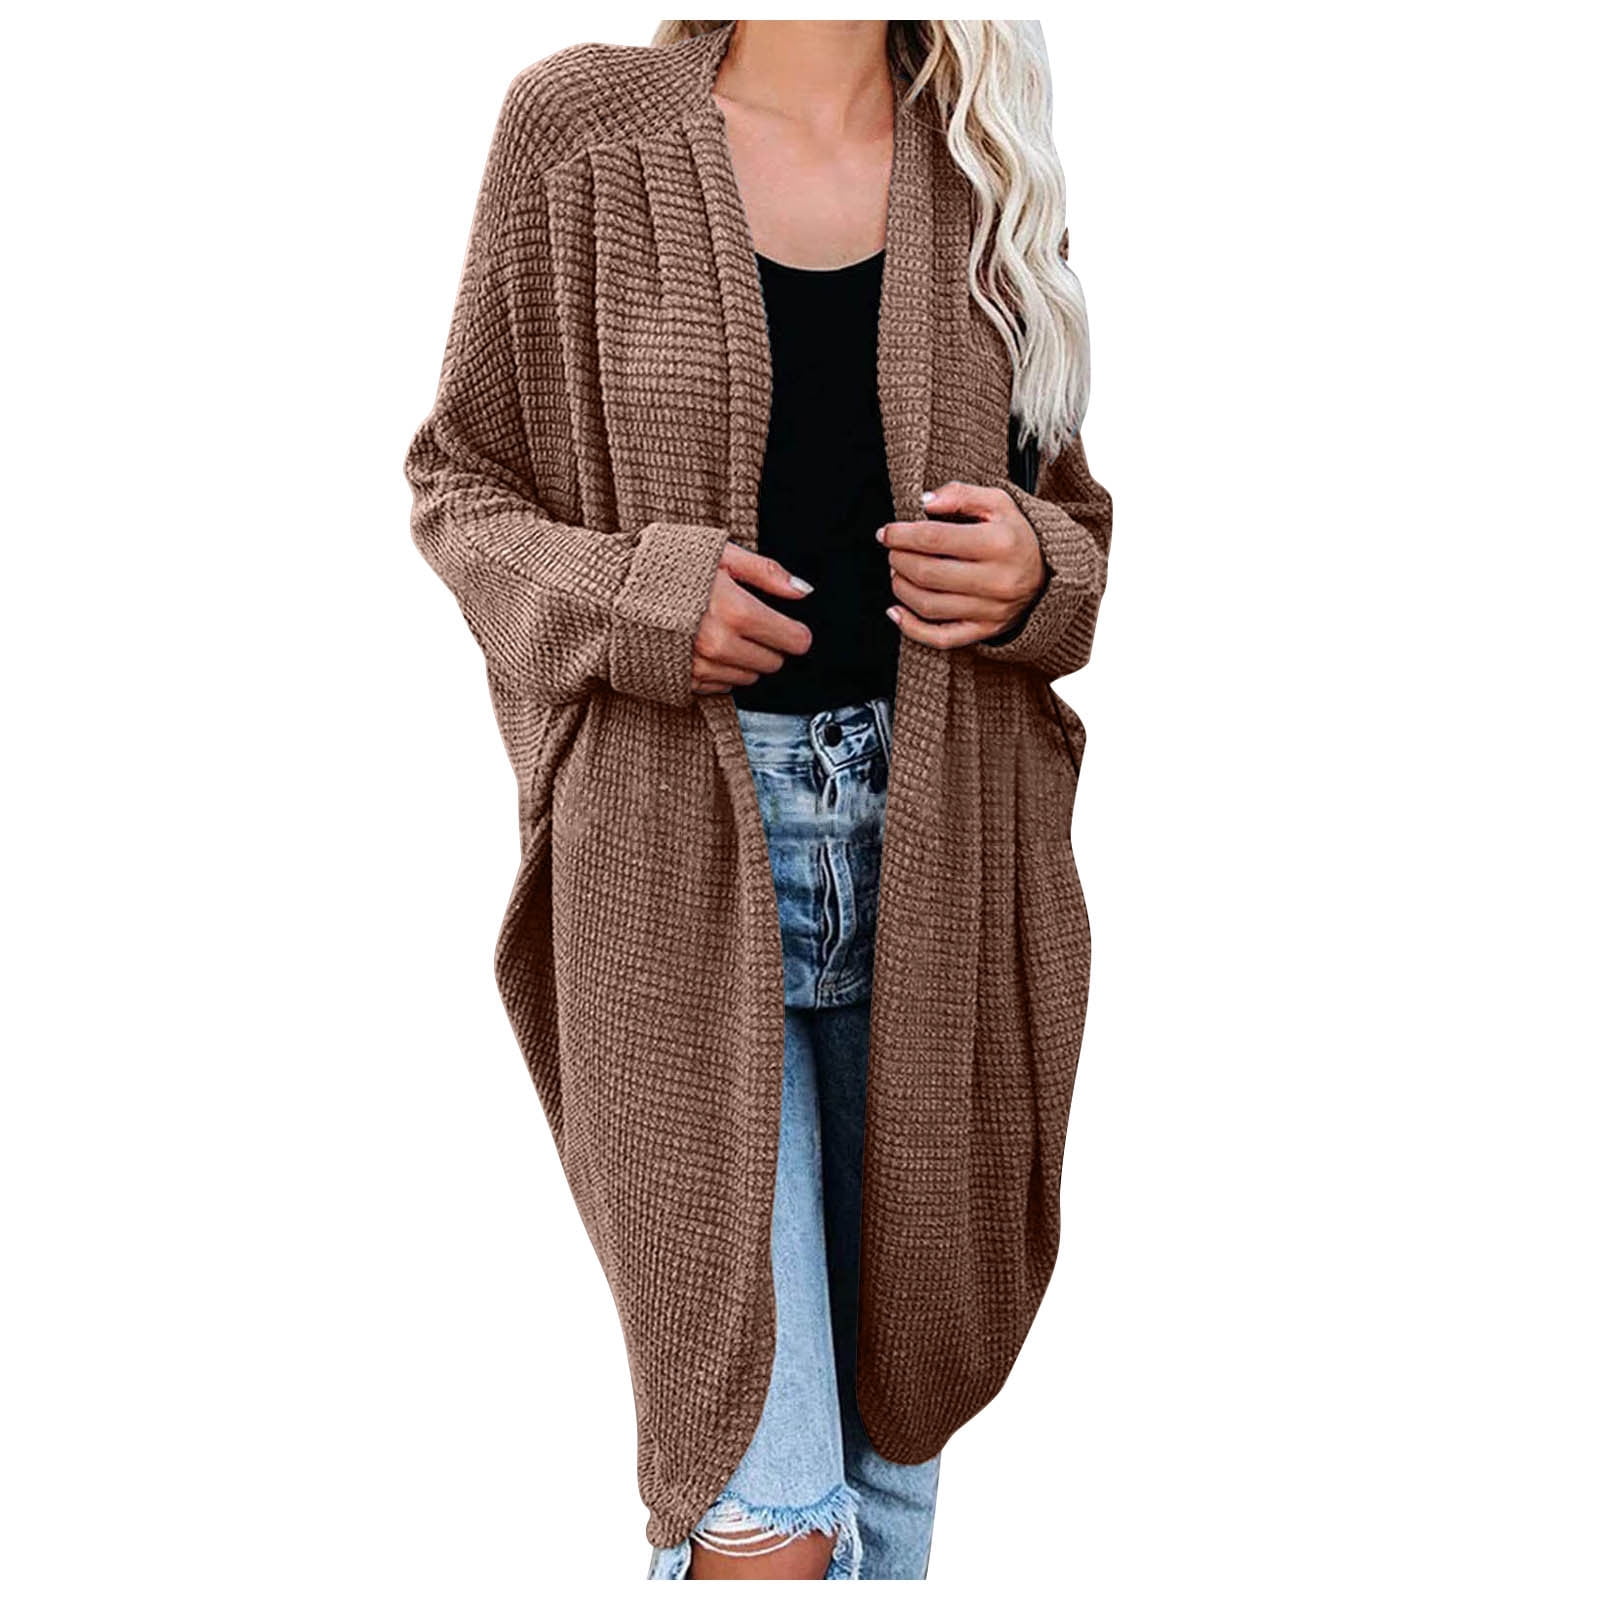 JSGEK Long Autumn Long Sweater Loose Shirt Color Women Discount V-Neck Tops Knitting Cardigan Sleeve Casual Fashion Solid Blouse